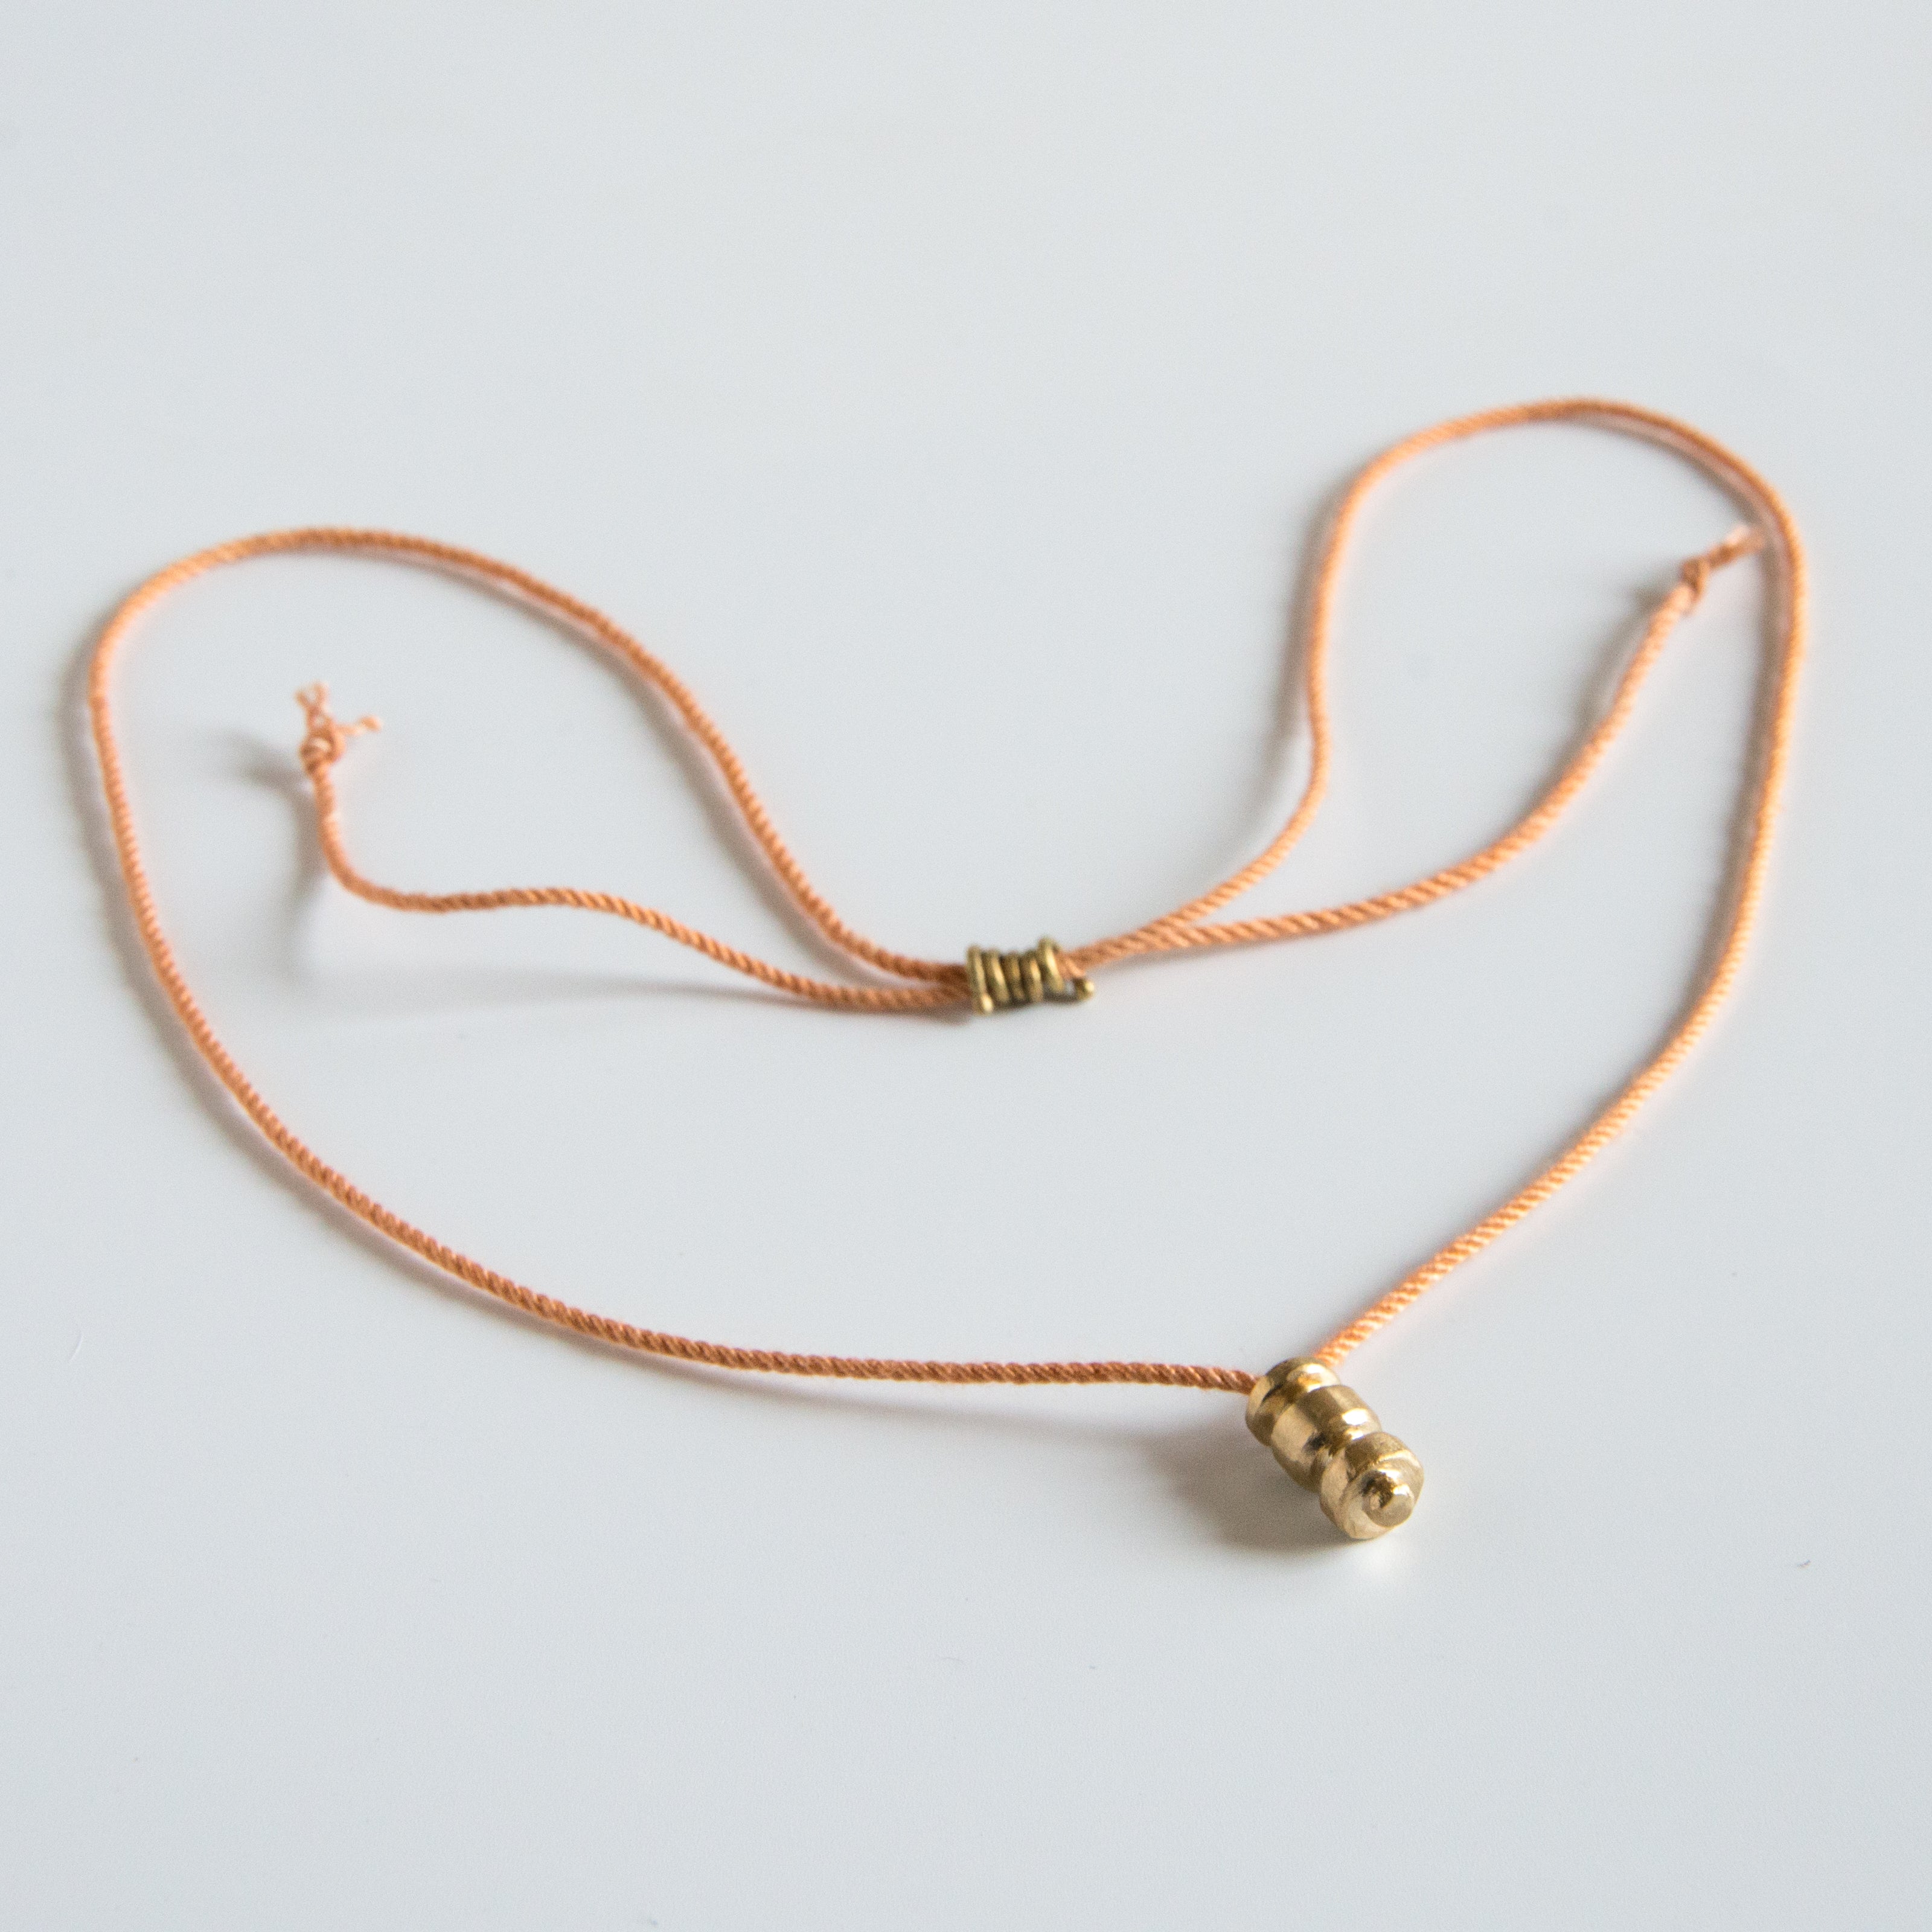 Sculpted brass pendant on this orange silk rope